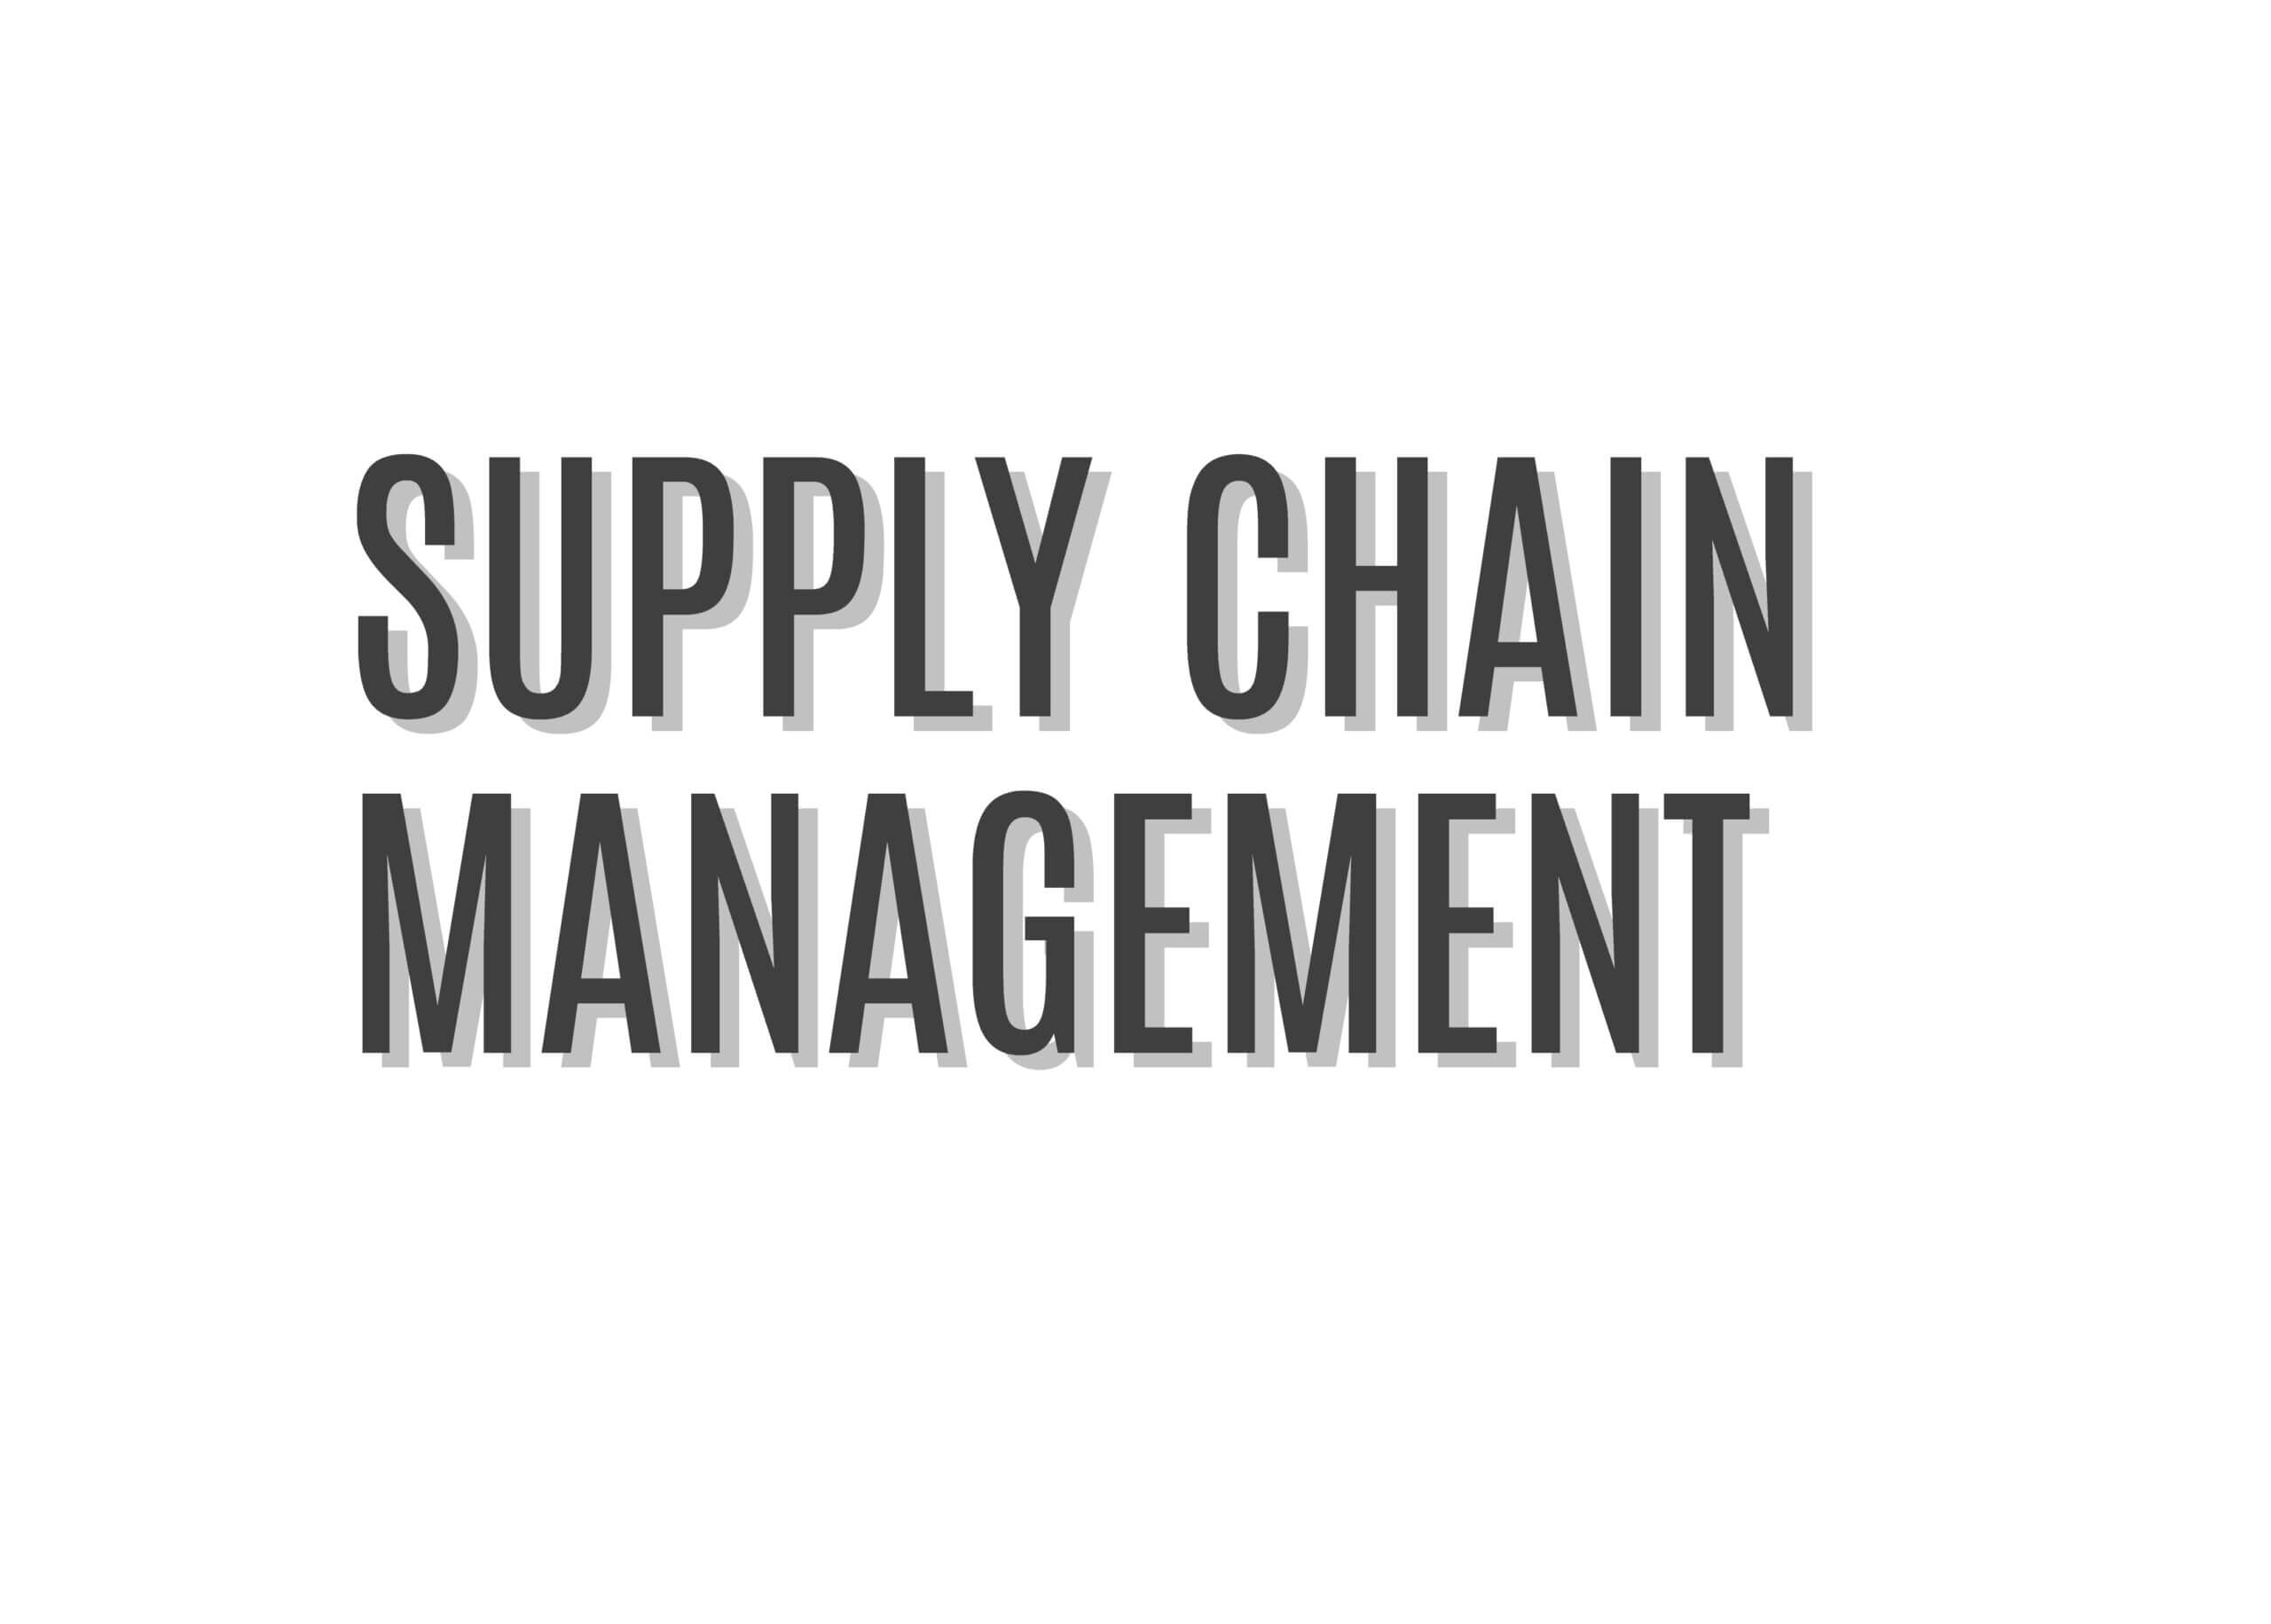 Supply chain management on a white background